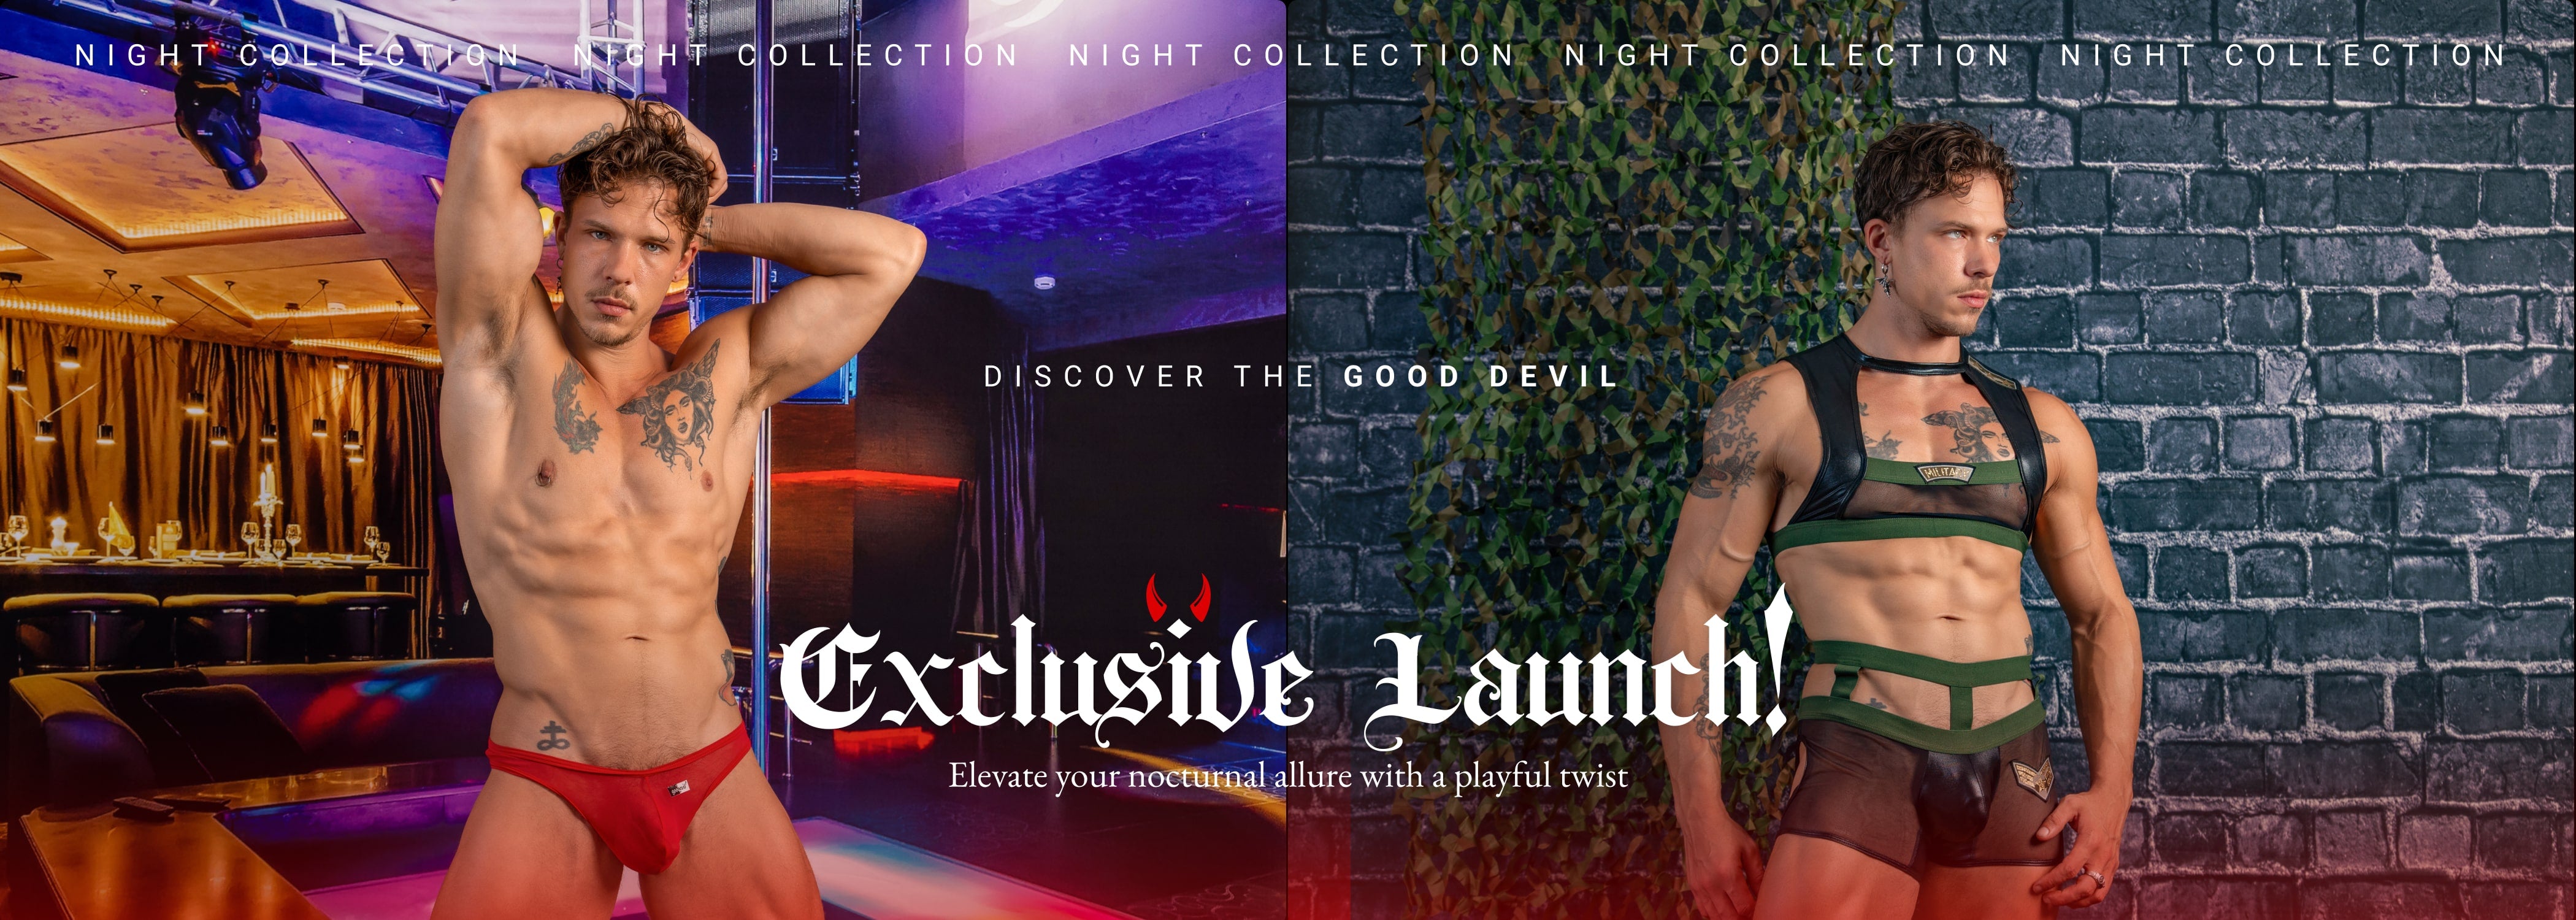 Good Devil New Night Collection